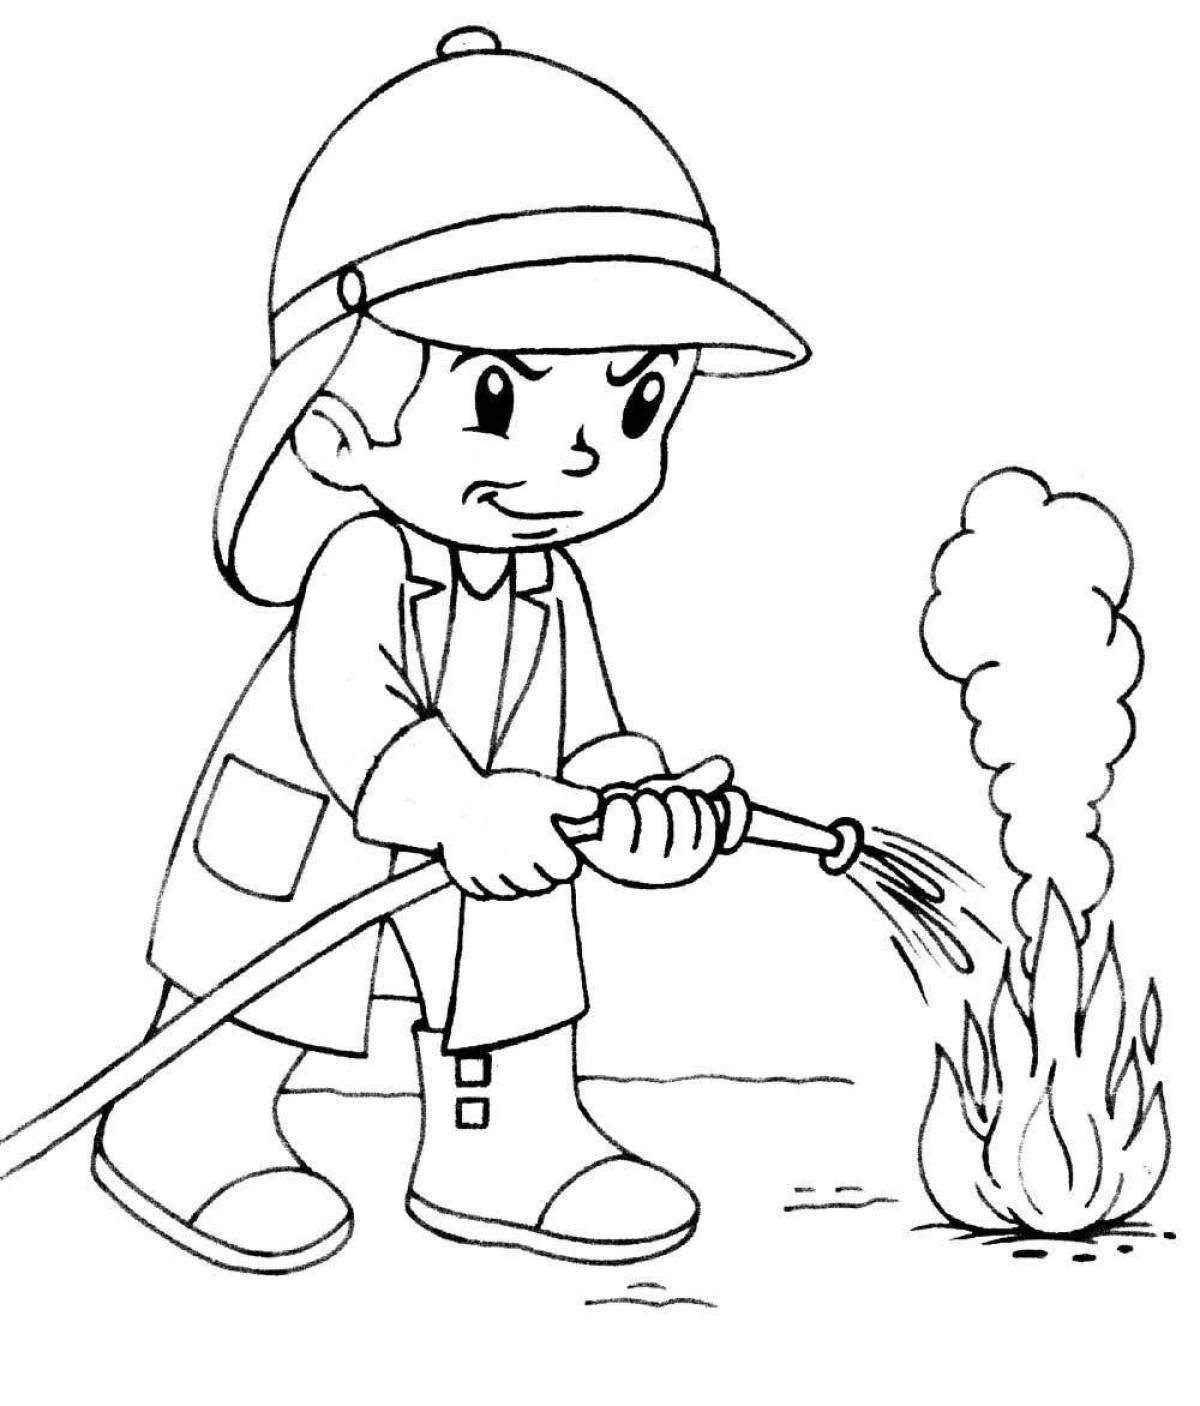 Simple kindergarten fire safety page